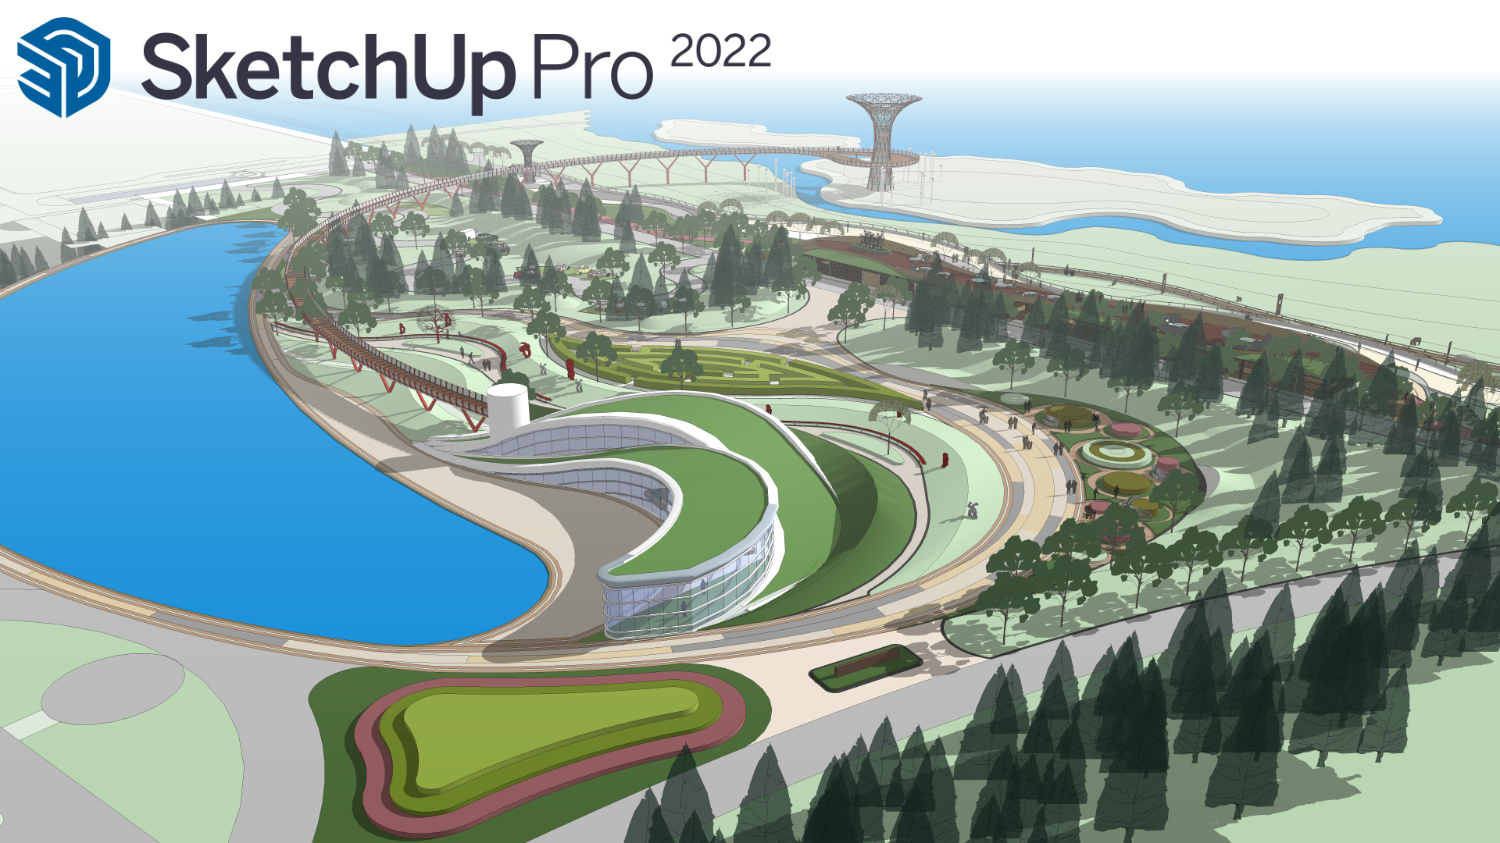 Work smarter and save time with SketchUp 2022